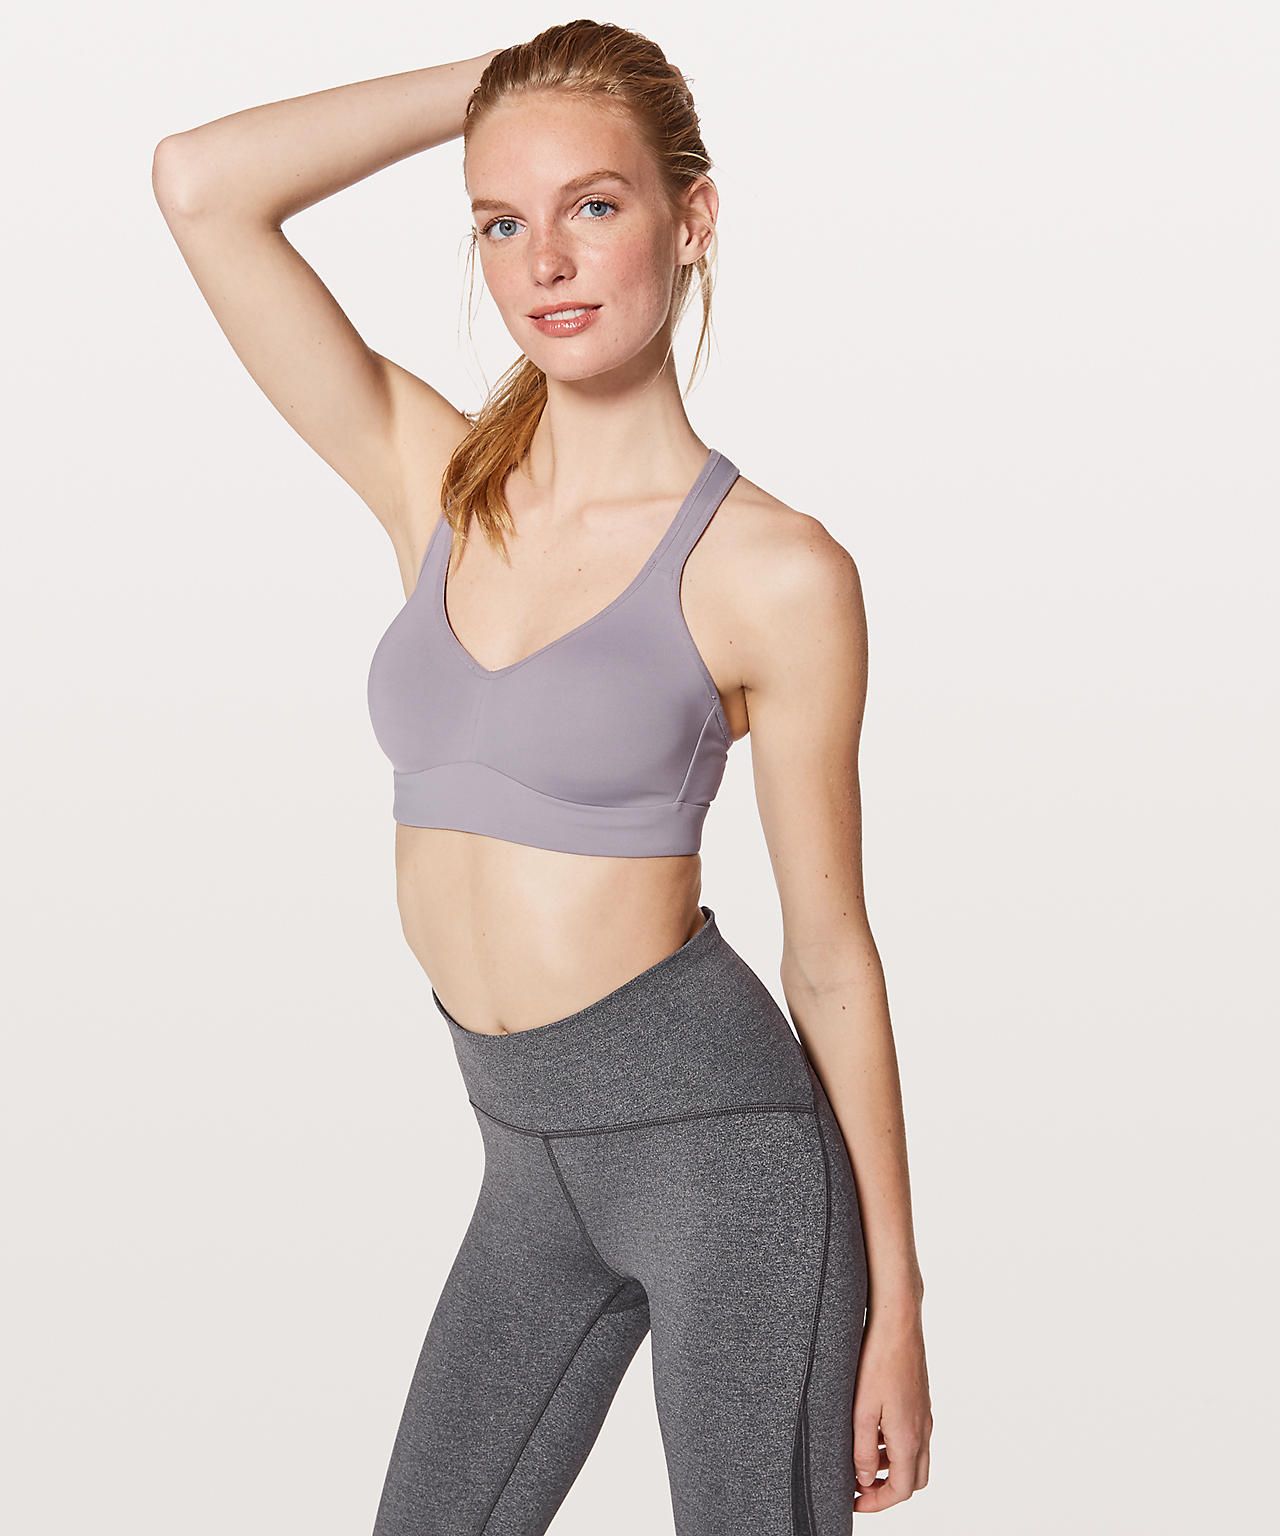 Lululemon Wants You to Focus on Mind and Body With Latest Run Collection